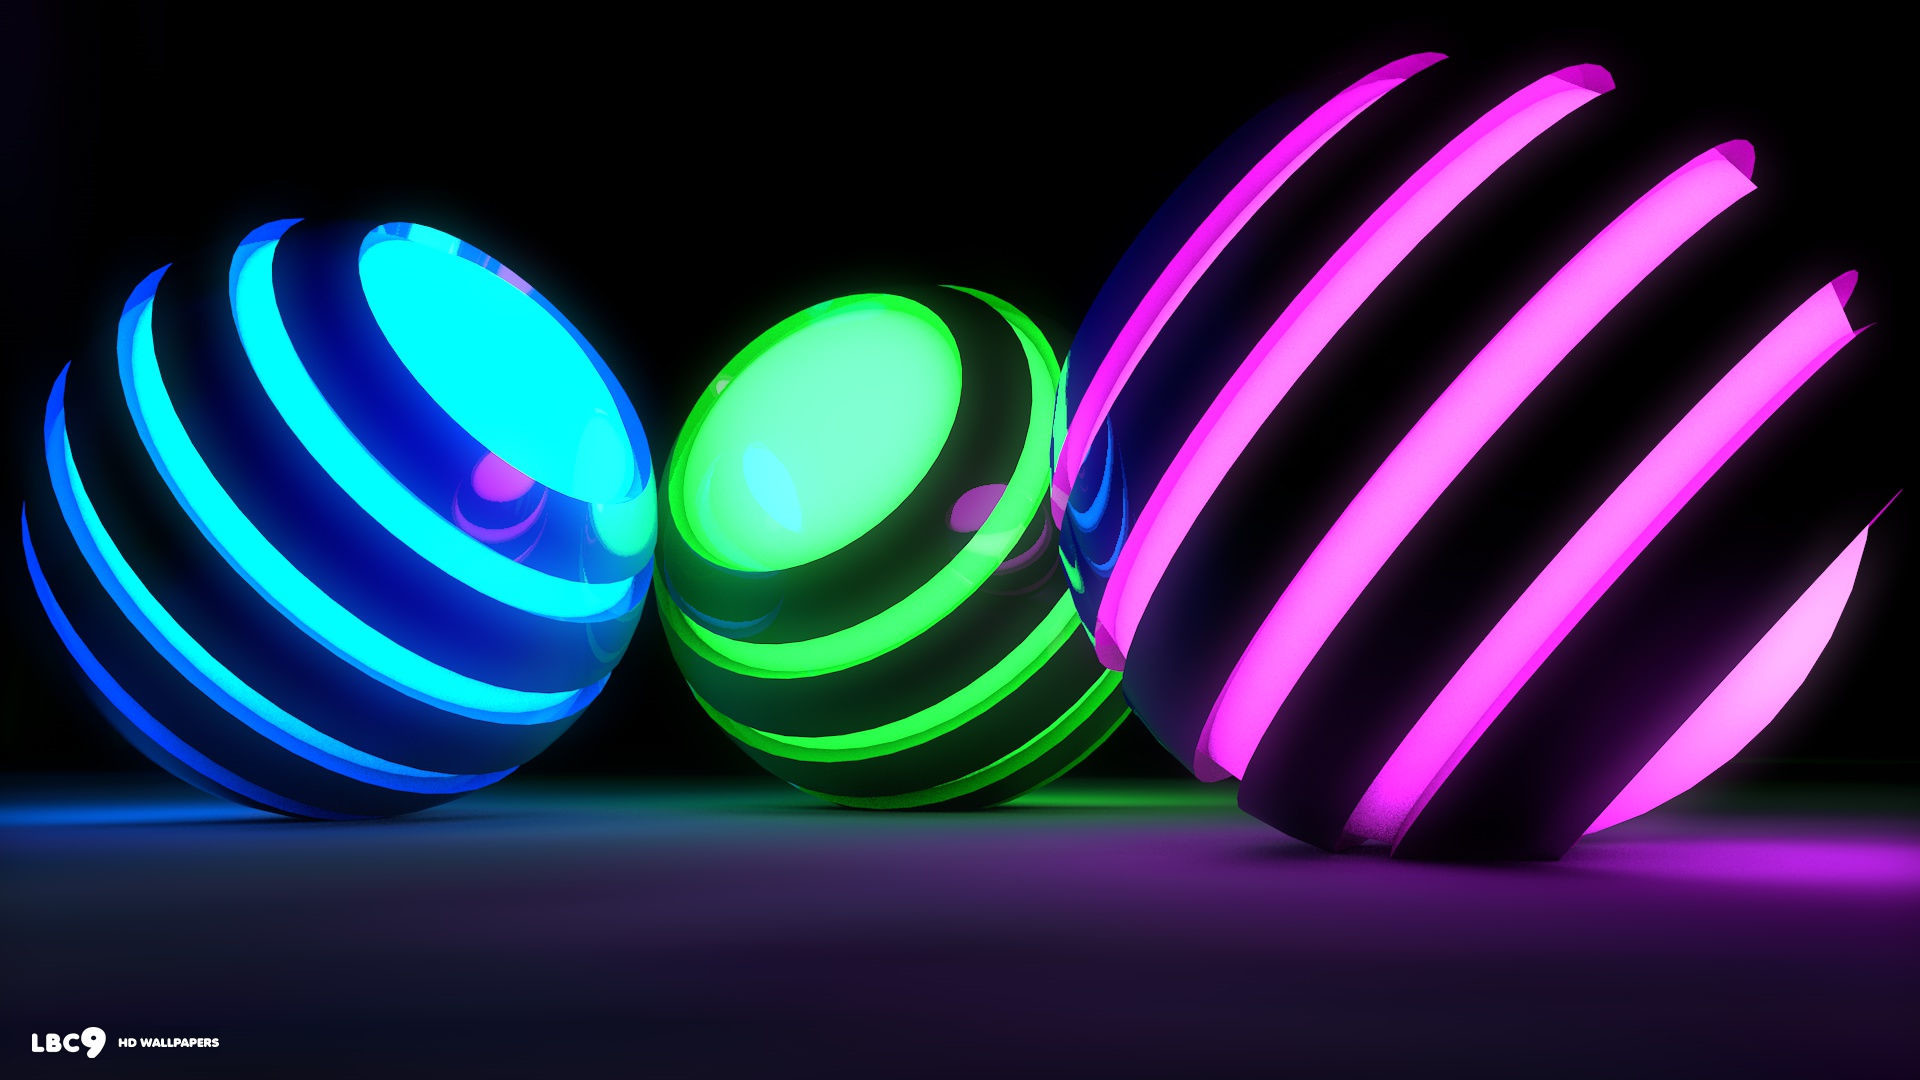 Cool Neon Backgrounds